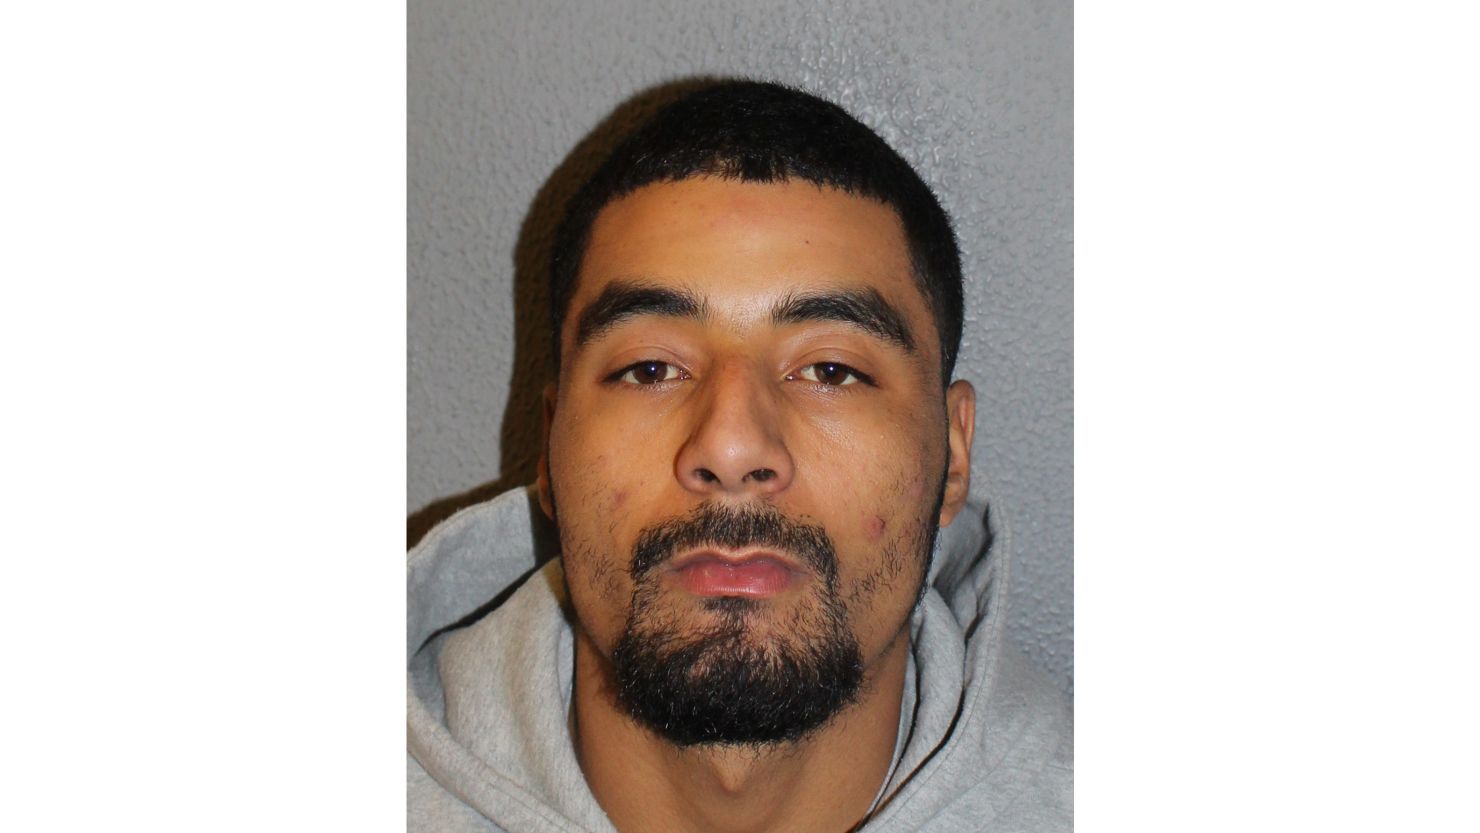 Ralston Dodd, 25, is being sought by police after serving a nine-month sentence.